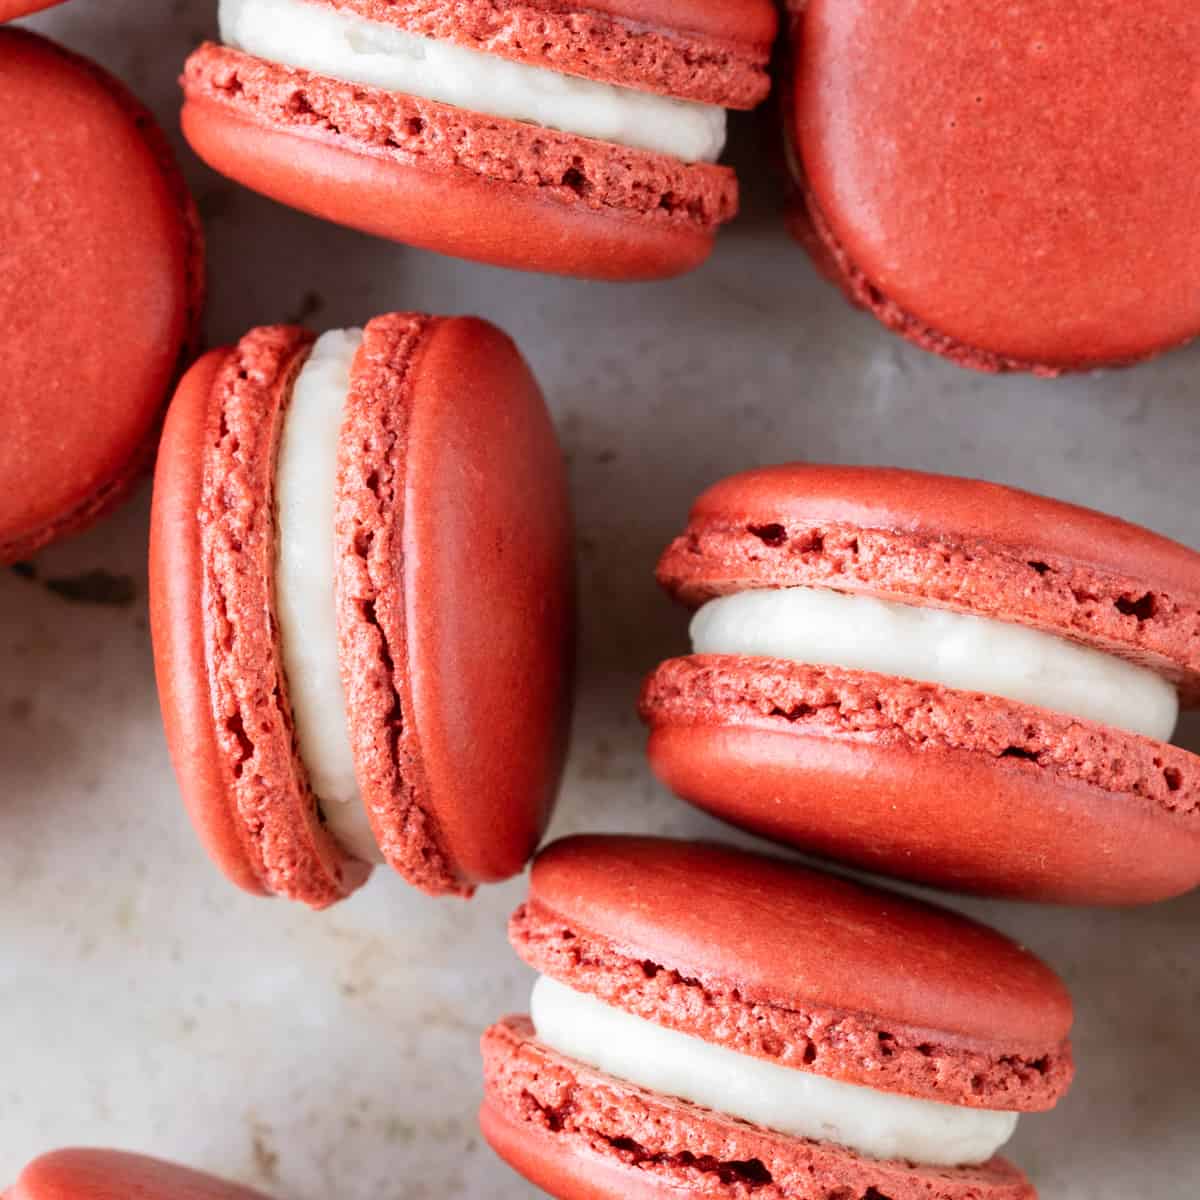 a close up of several red velvet macarons on a tan background